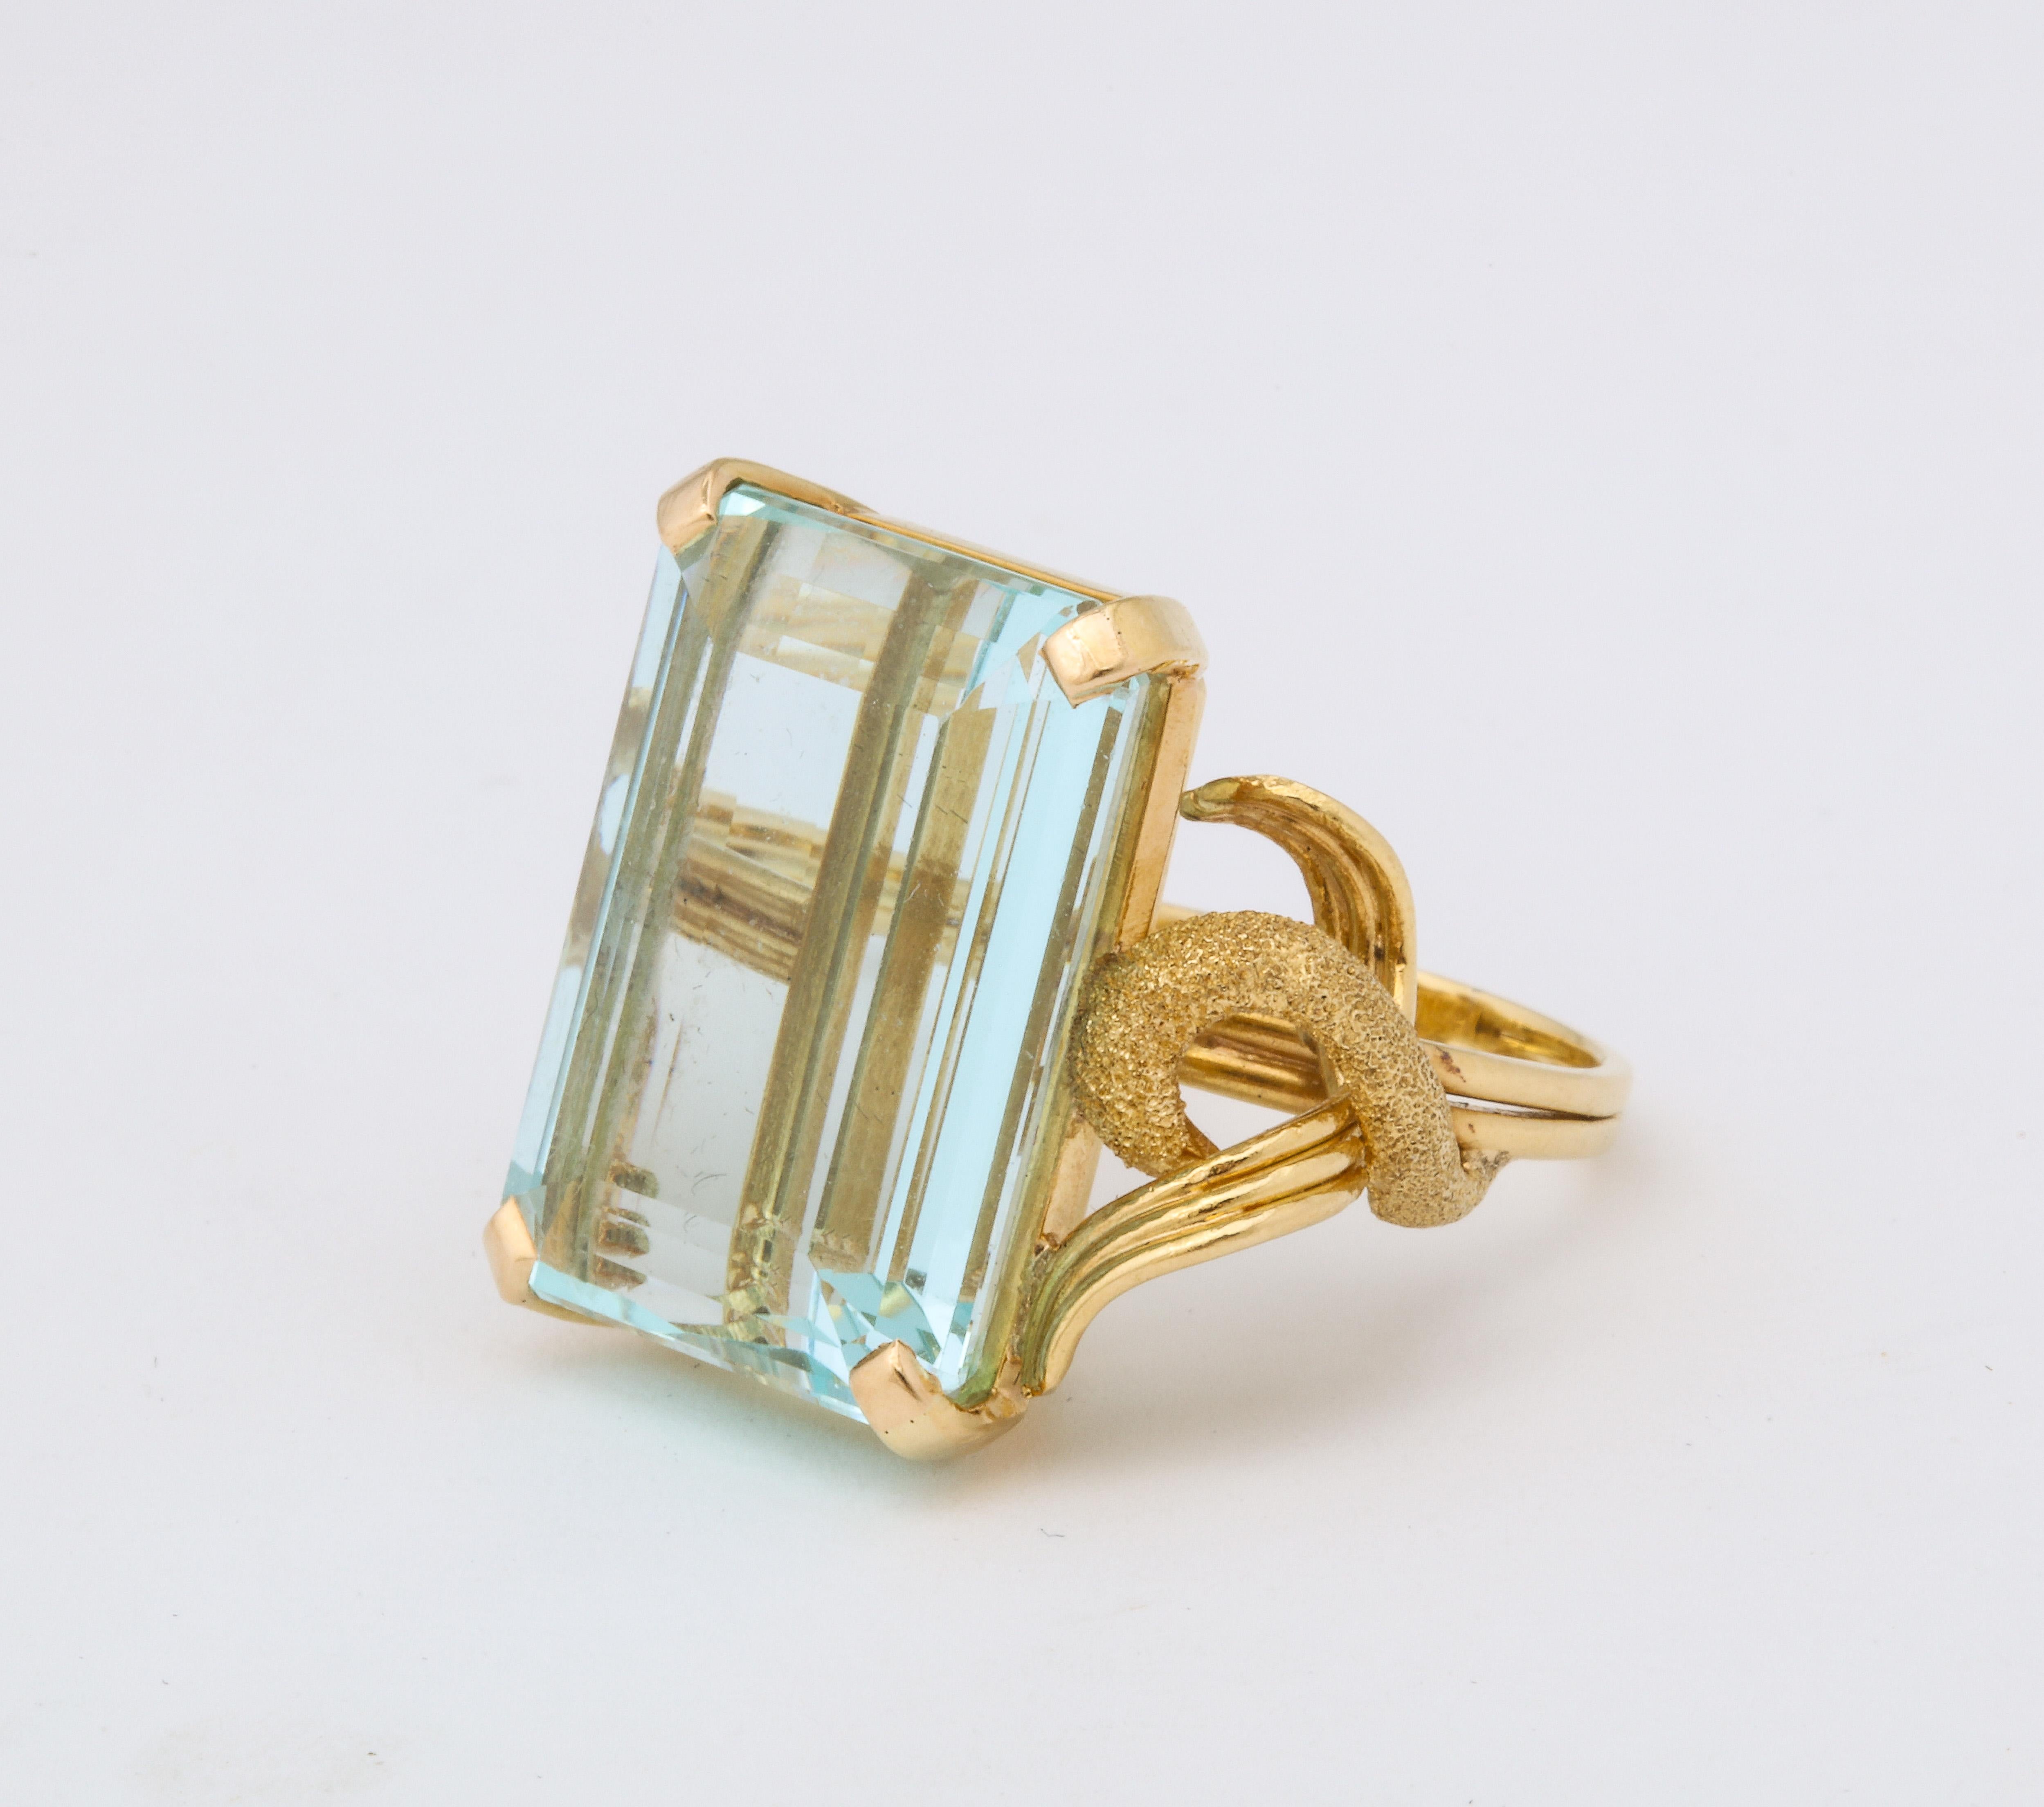 Aquamarine Retro 18 K Gold Ring In Good Condition For Sale In New York, NY